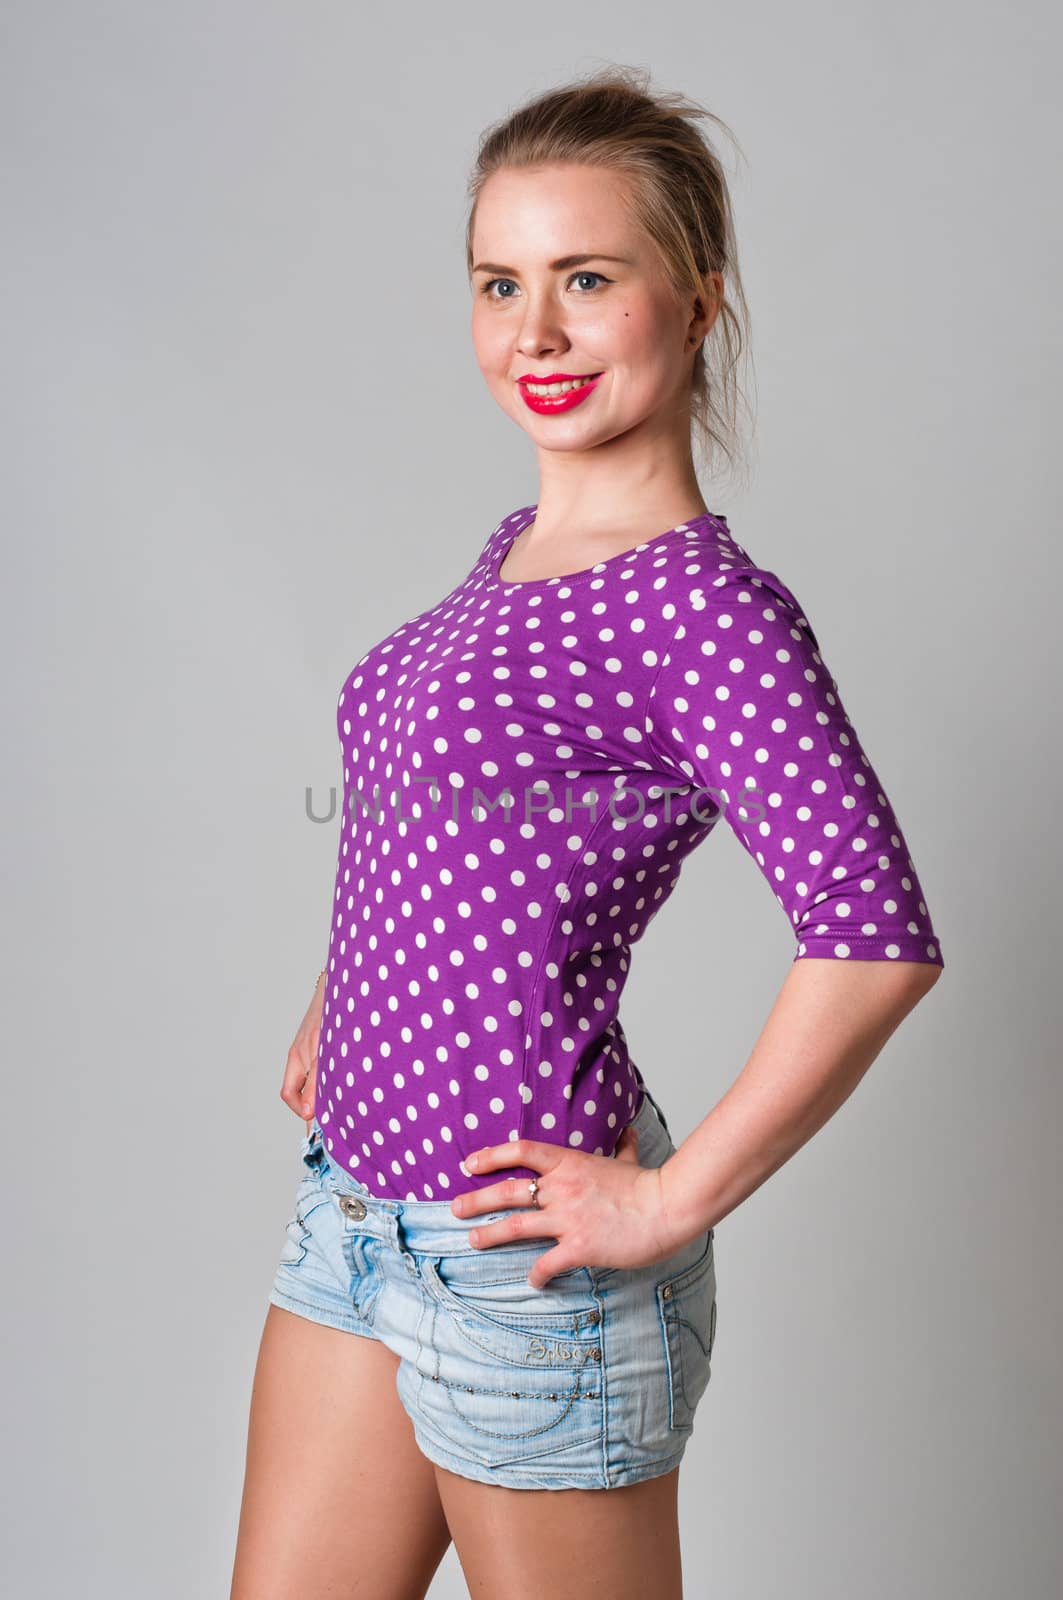 Pin up girl standing and smiling portrait, studio shot